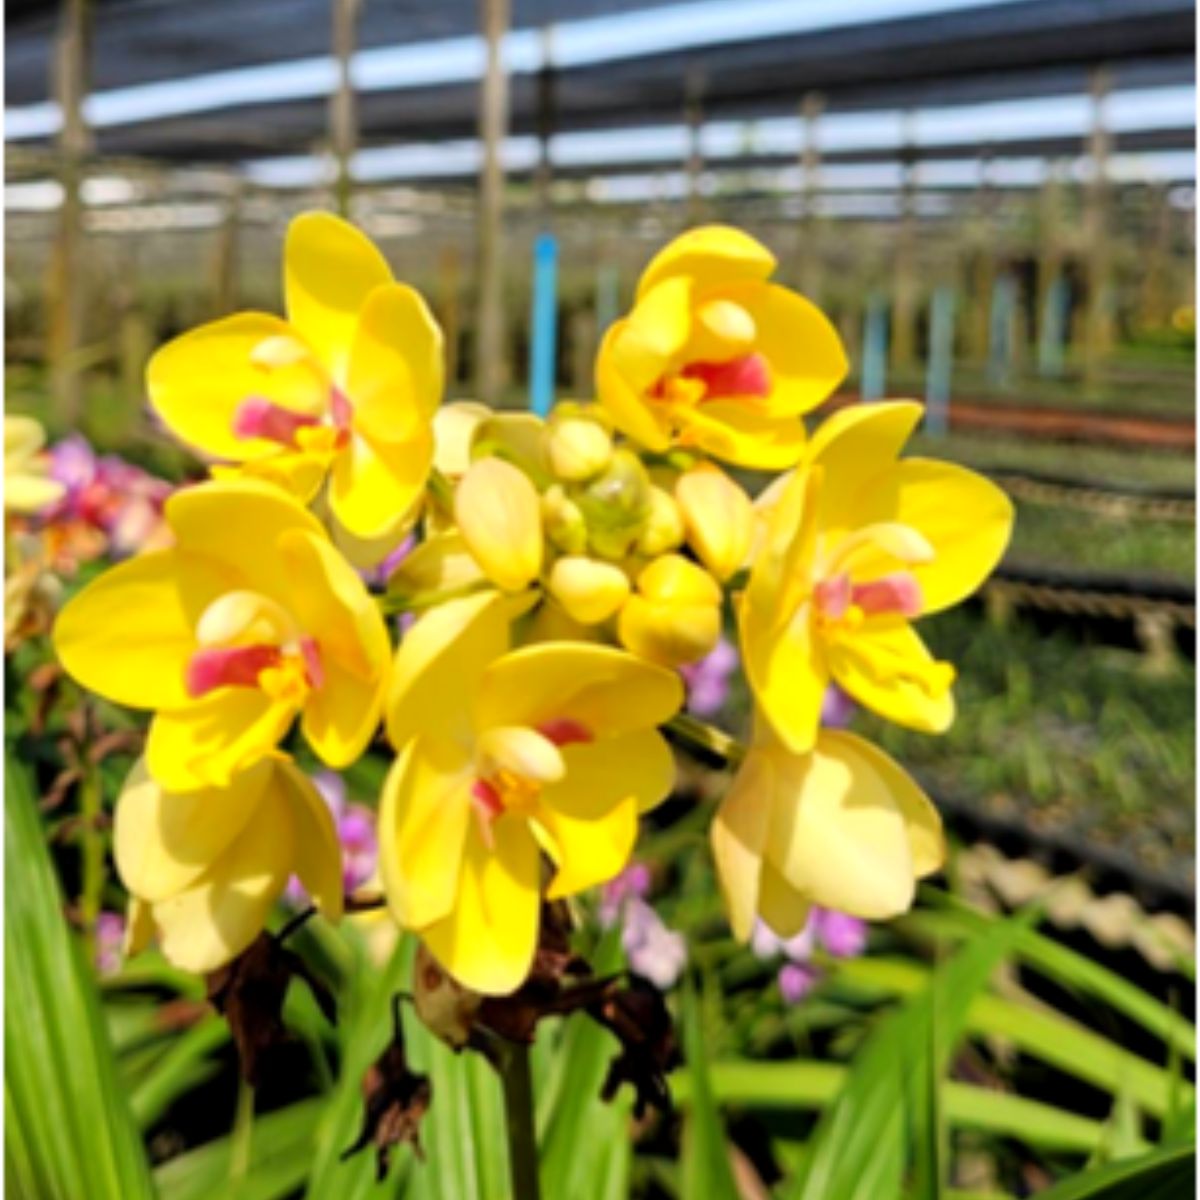 The Spathoglottis Yellow Red Lip orchid typically features medium-sized blooms. The flowers showcase a combination of yellow petals with a distinctive red lip or labellum. The yellow color of the petals adds a bright and cheerful touch, while the red lip creates a striking contrast.